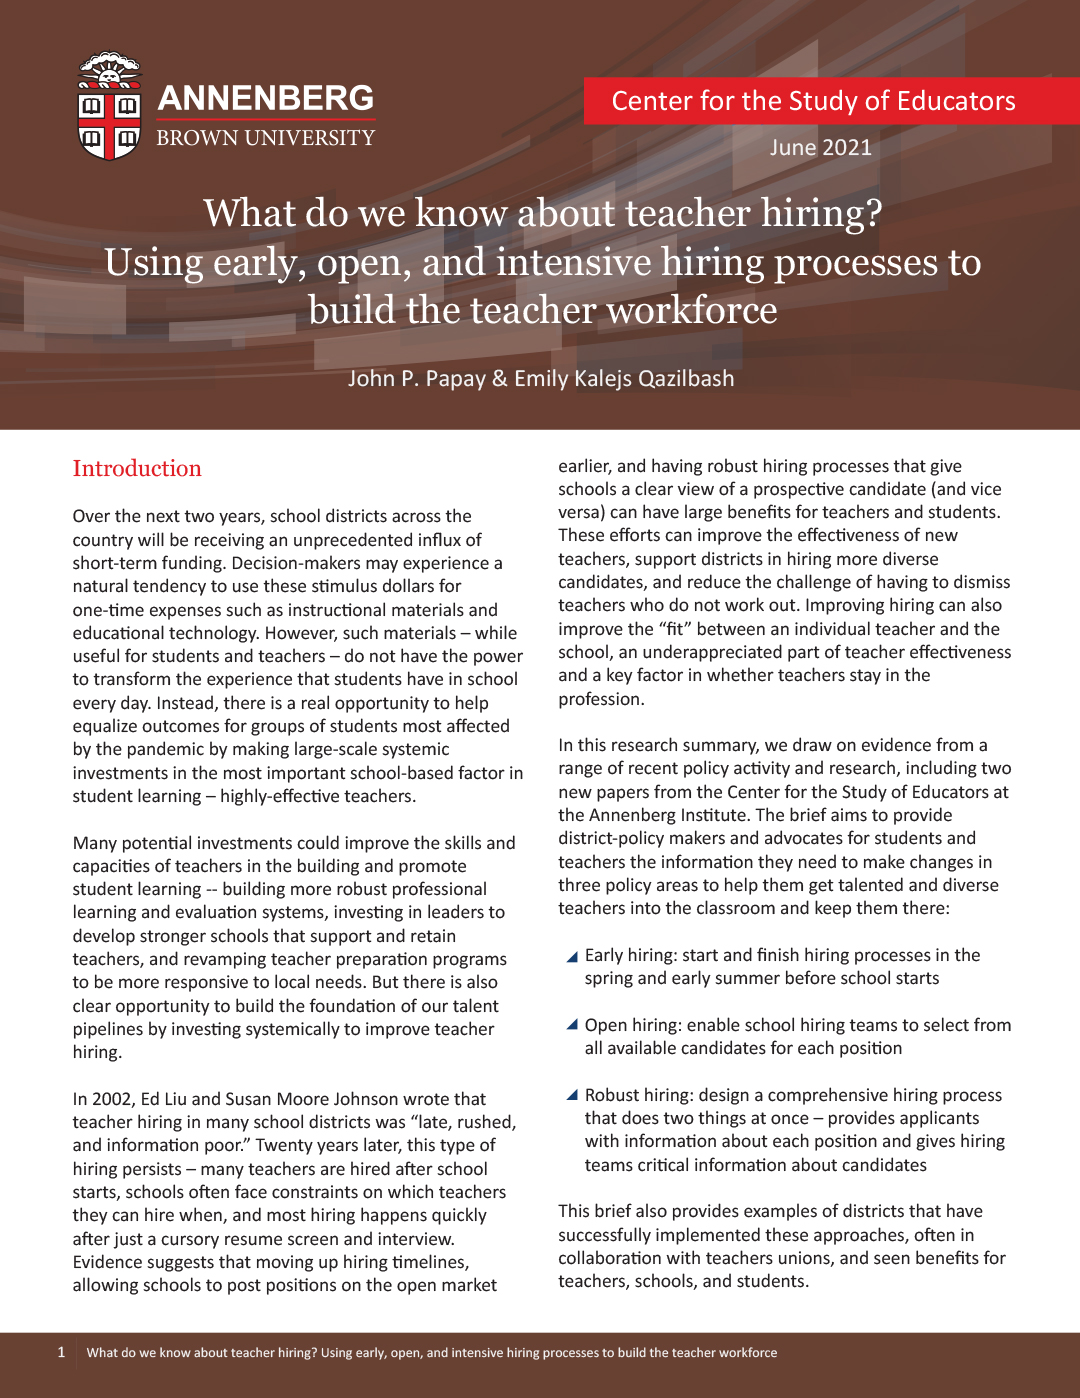 What do we know about teacher hiring? Using early, open, and intensive hiring processes to build the teacher workforce